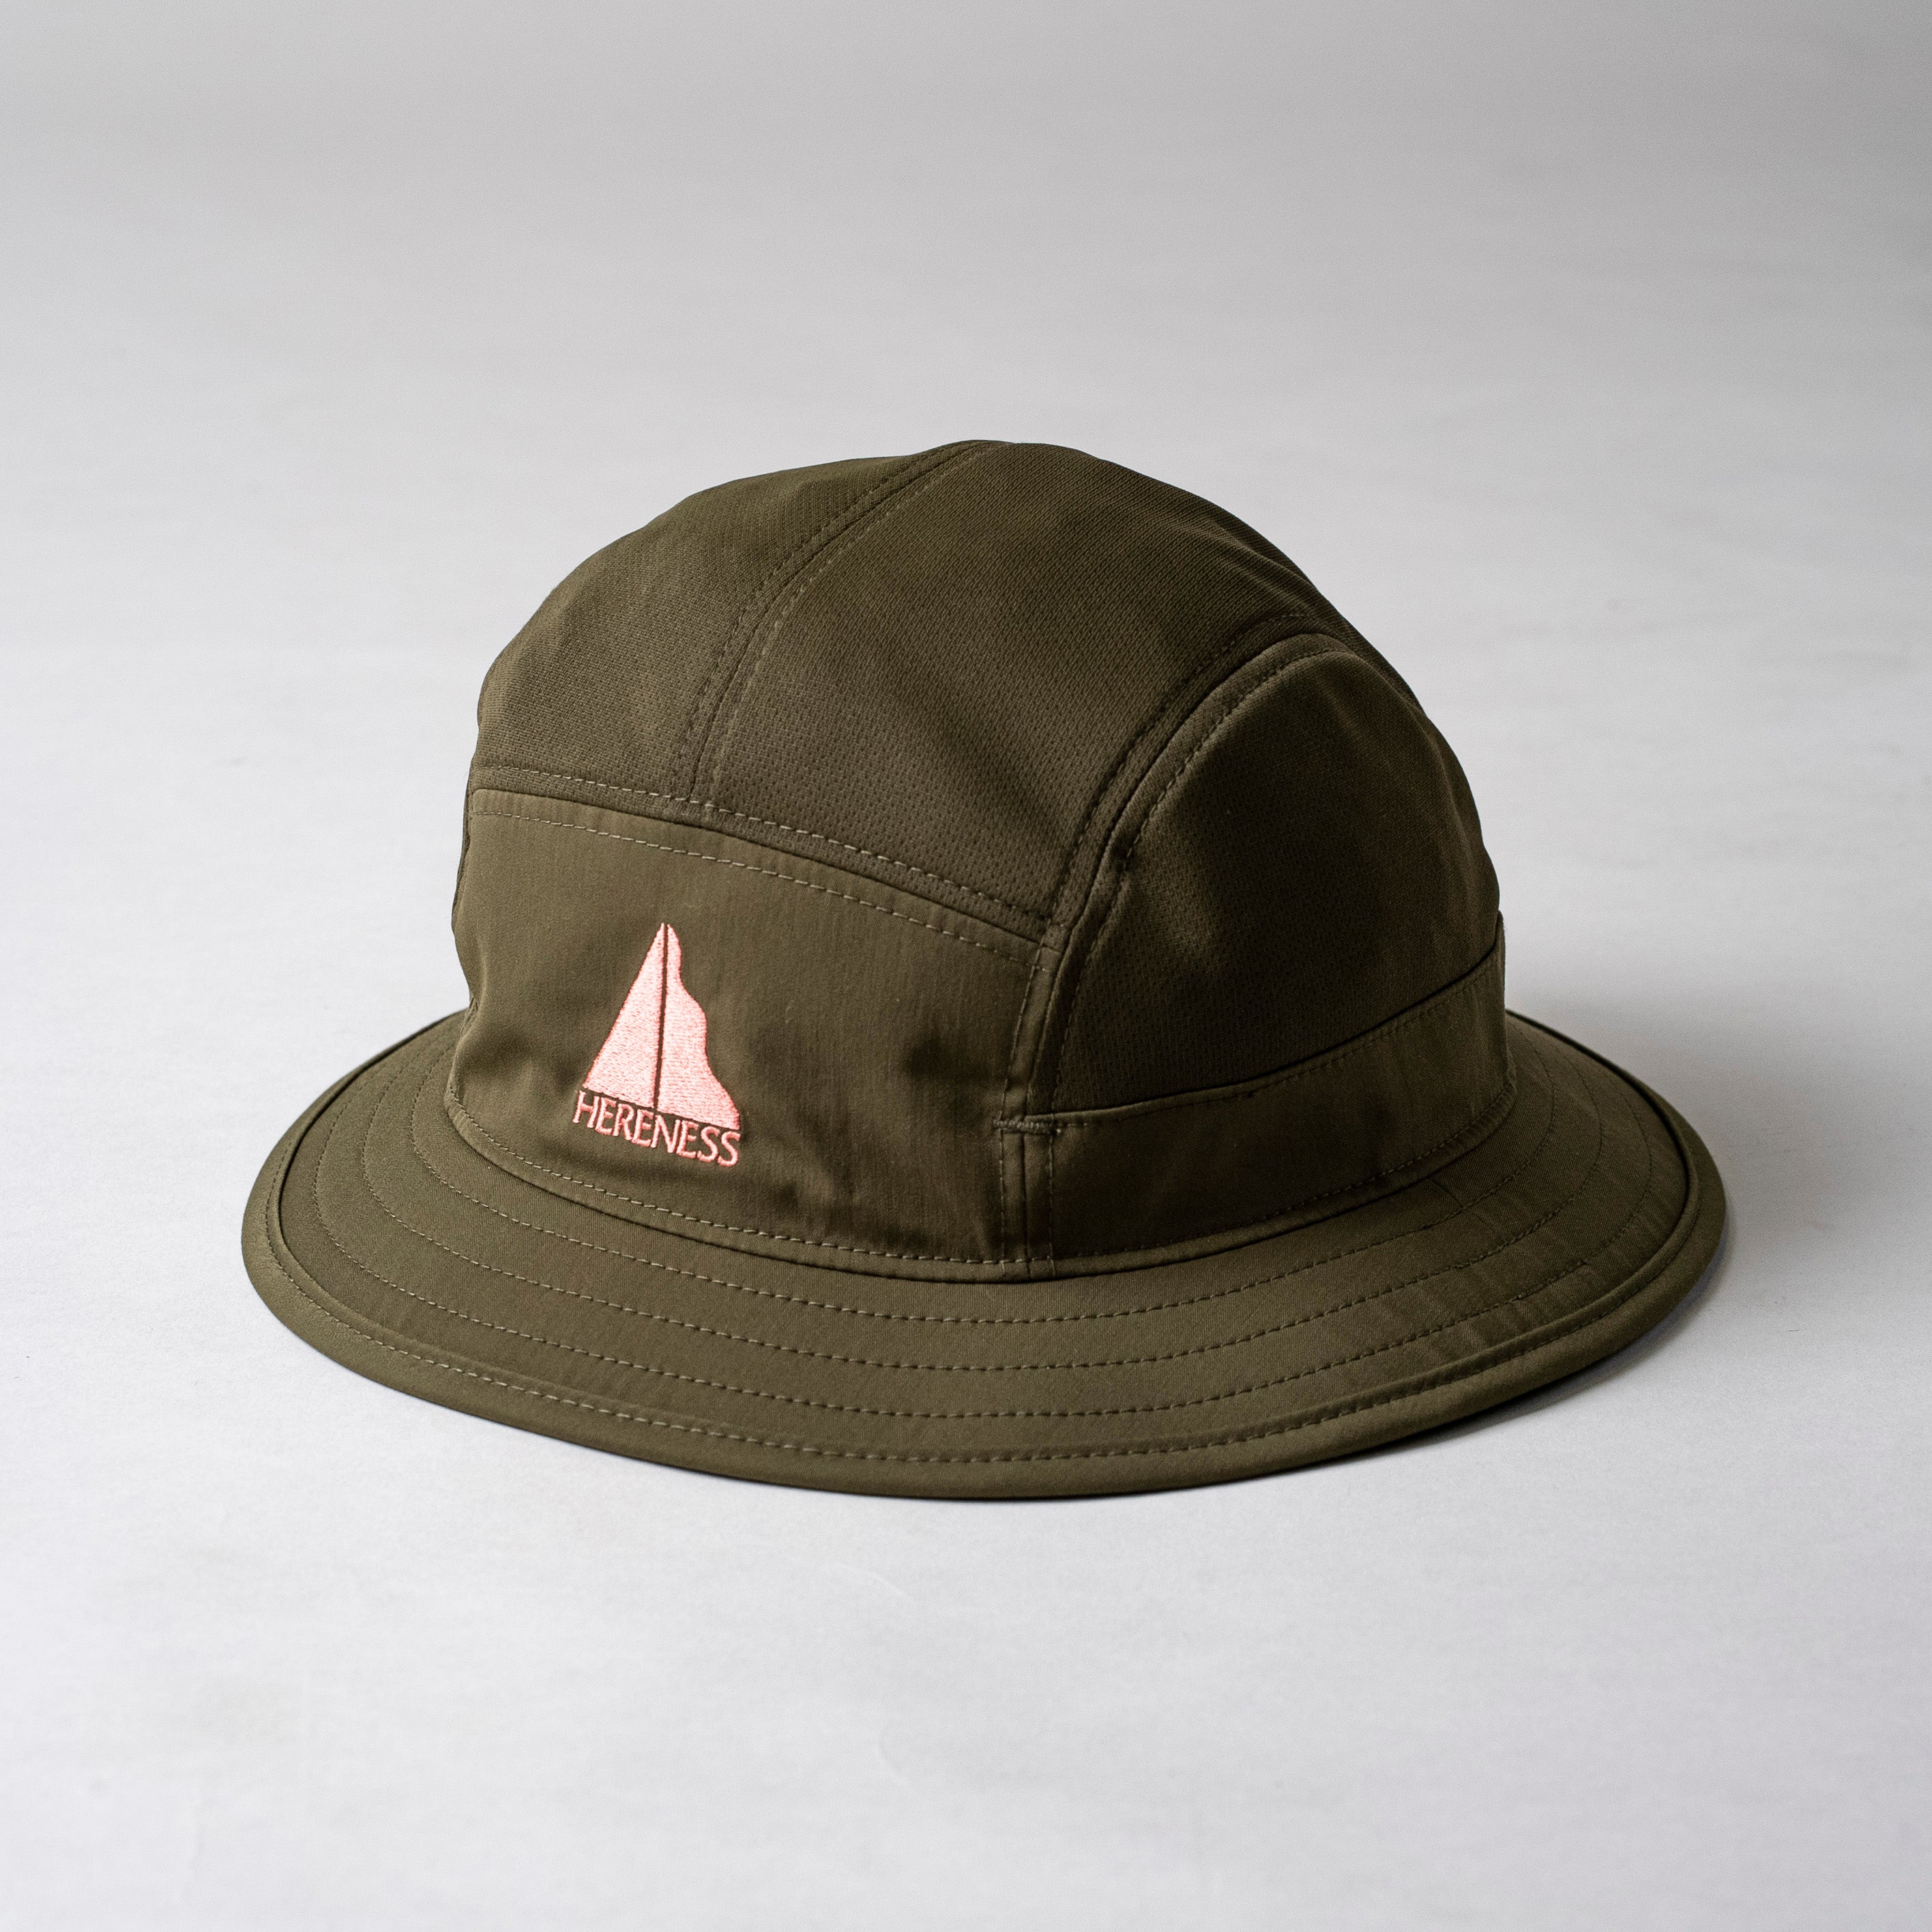 MODERATE HAT – HERENESS.jp